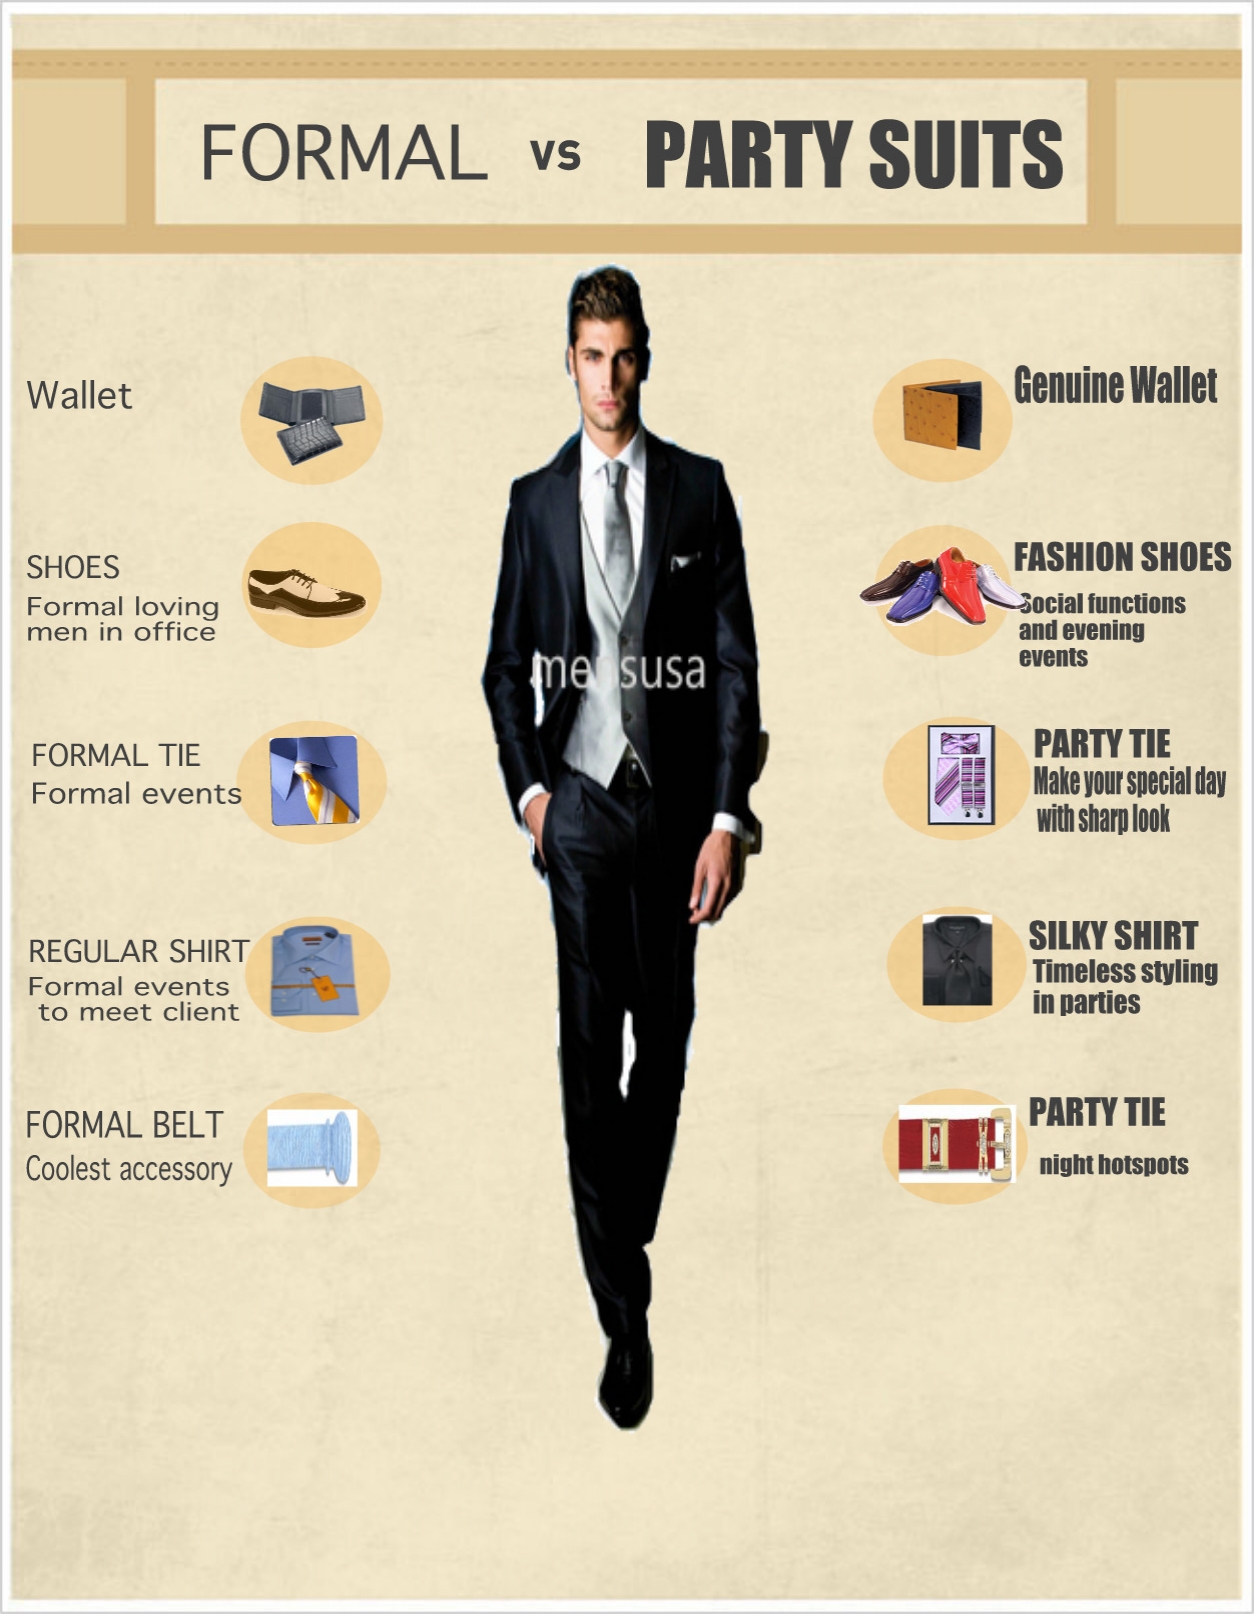 Formal vs party suits from mensusa | Visual.ly